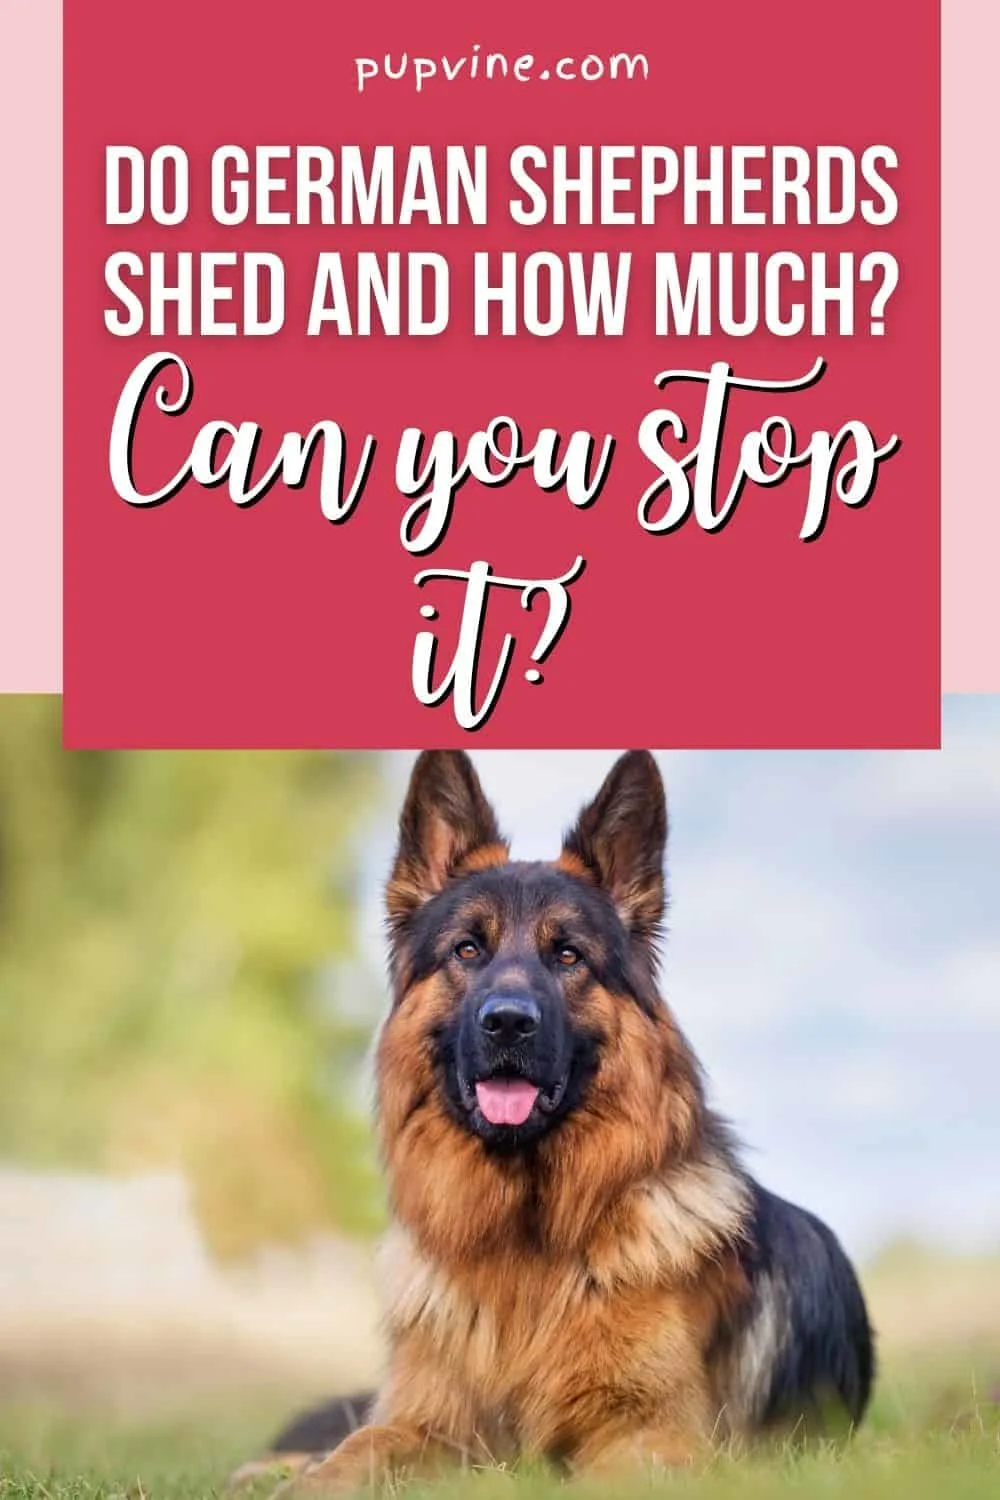 Do German Shepherds Shed And How Much? Can You Stop It?